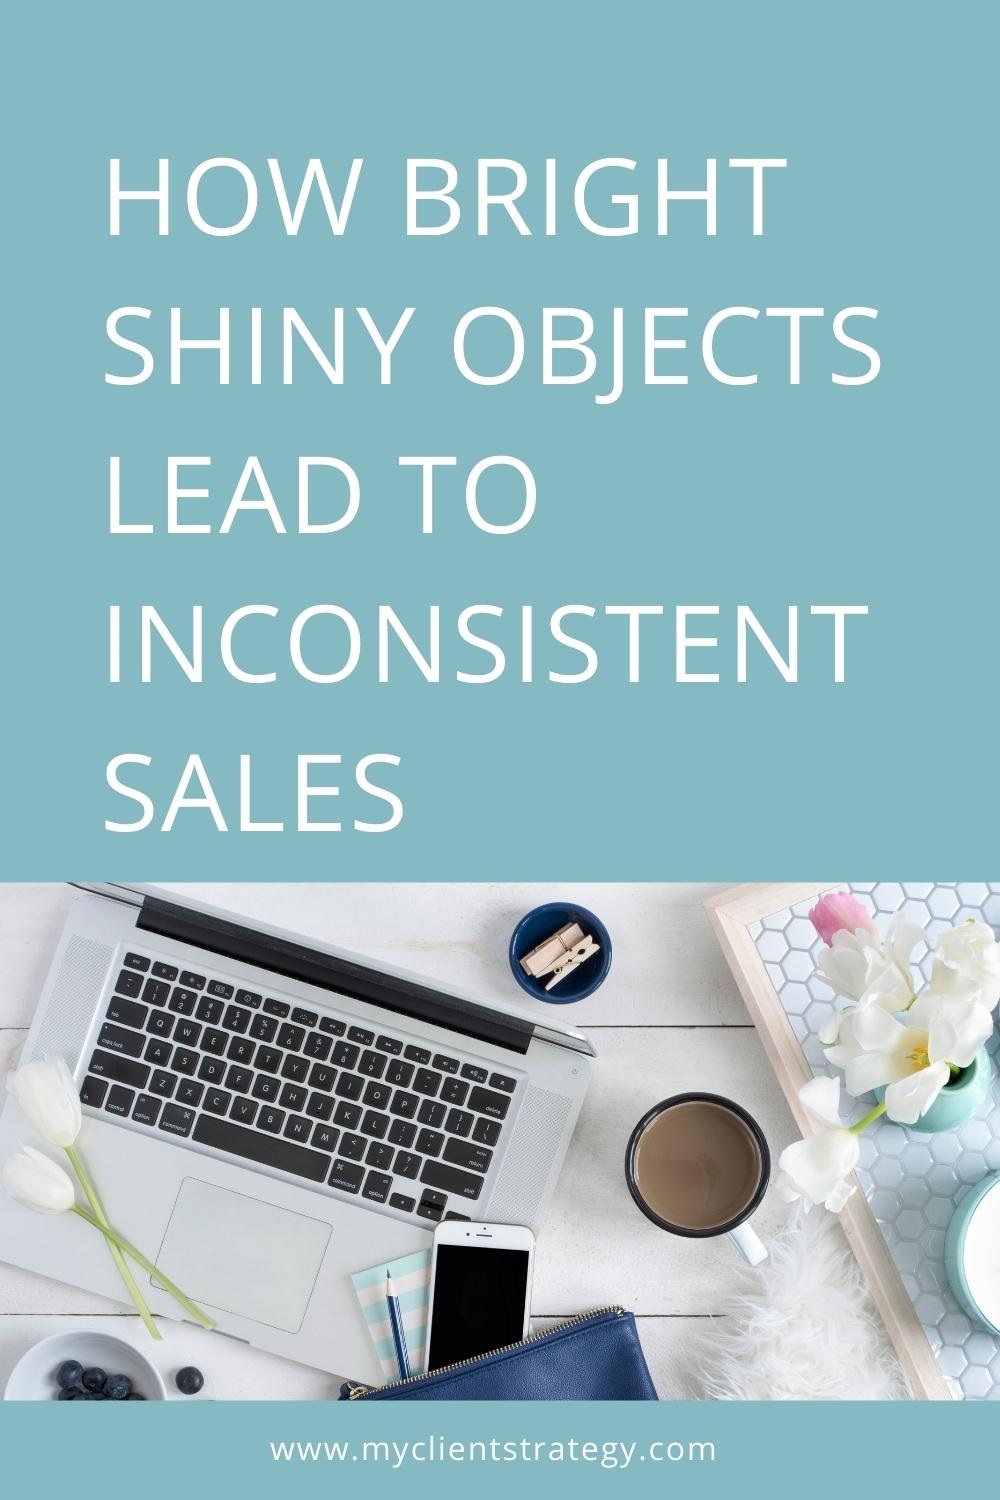 How bright shiny objects lead to inconsistent sales